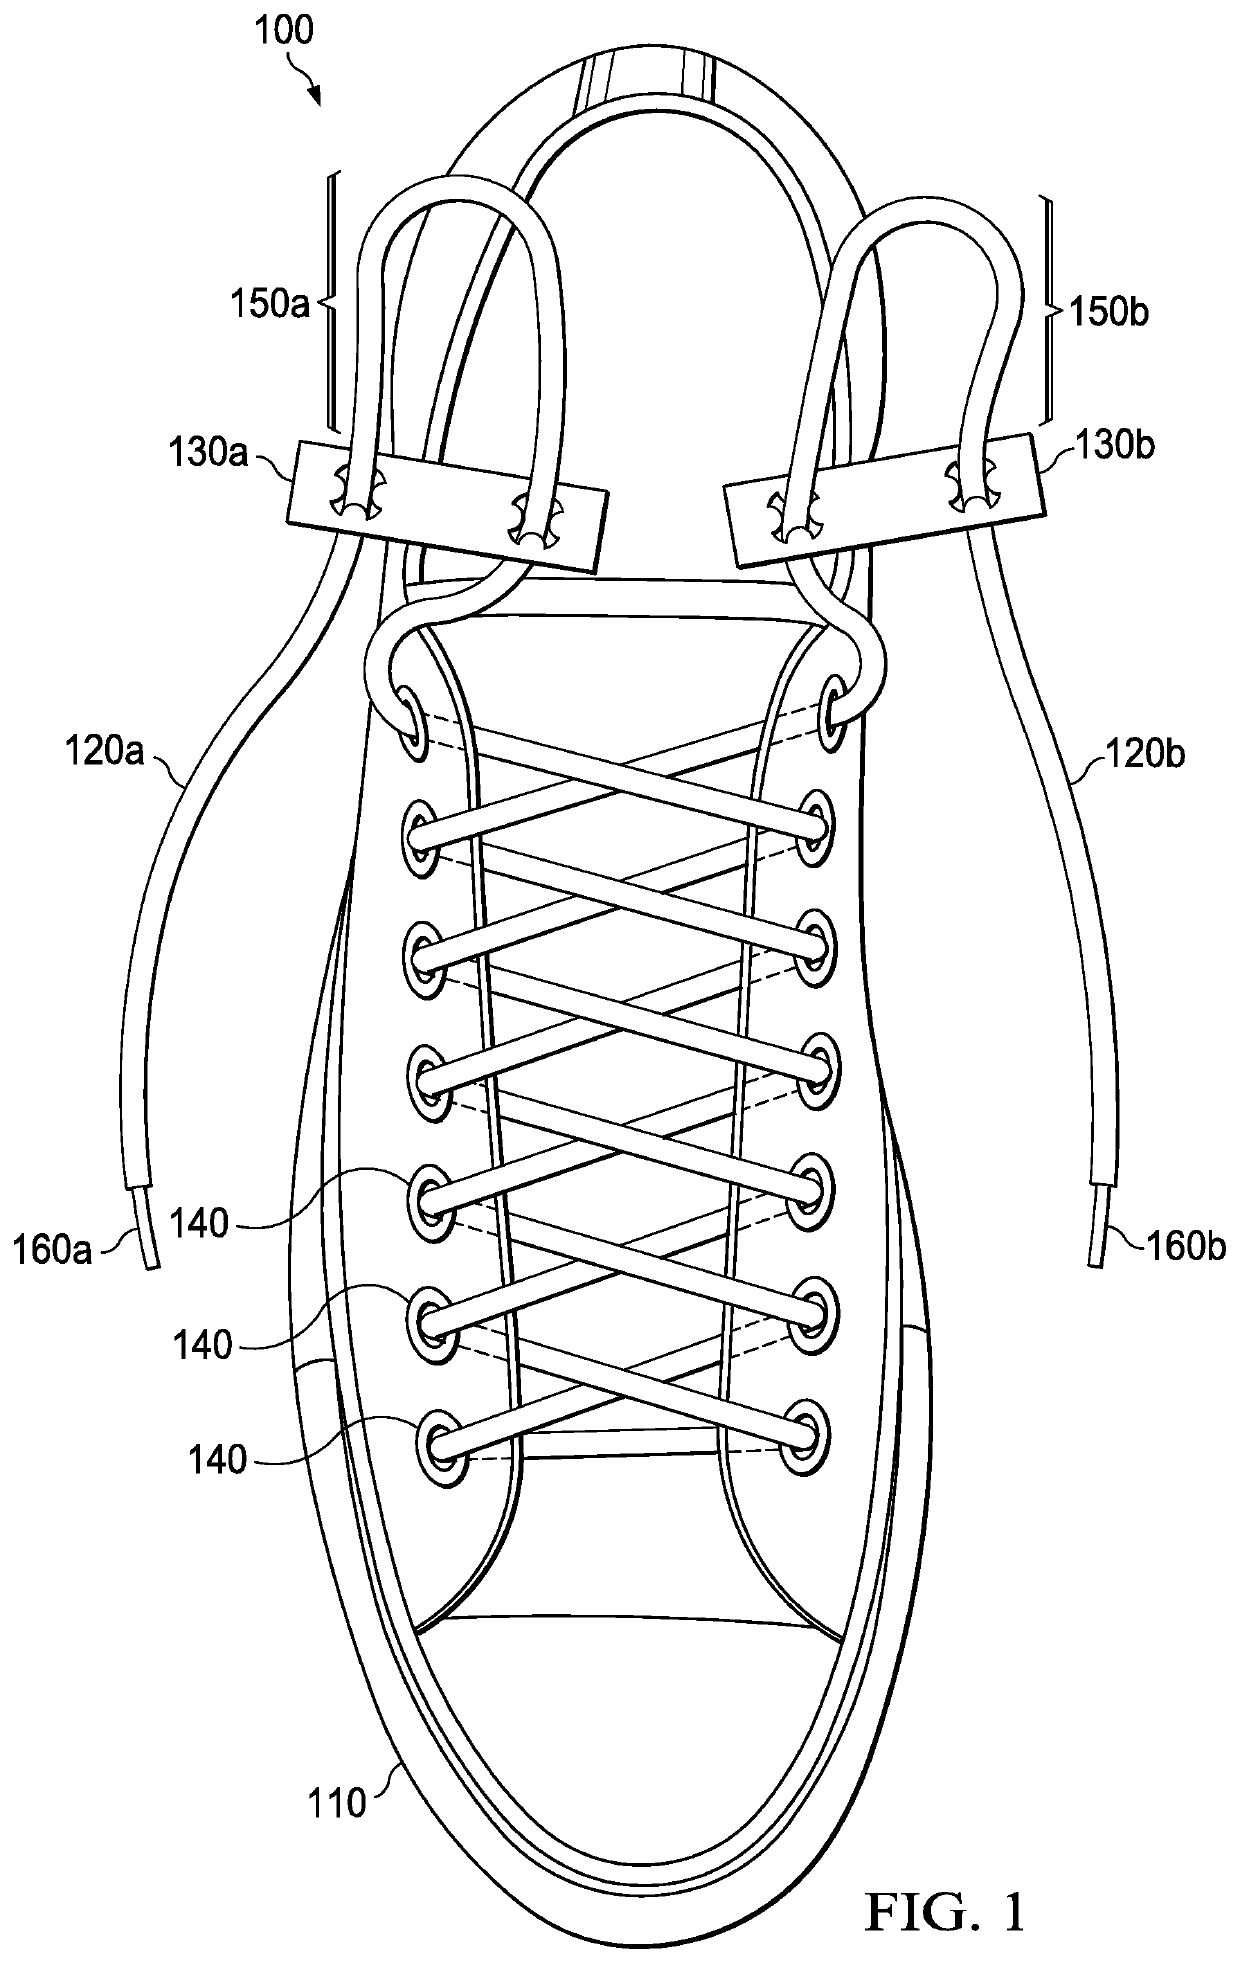 System and method of tying a shoelace